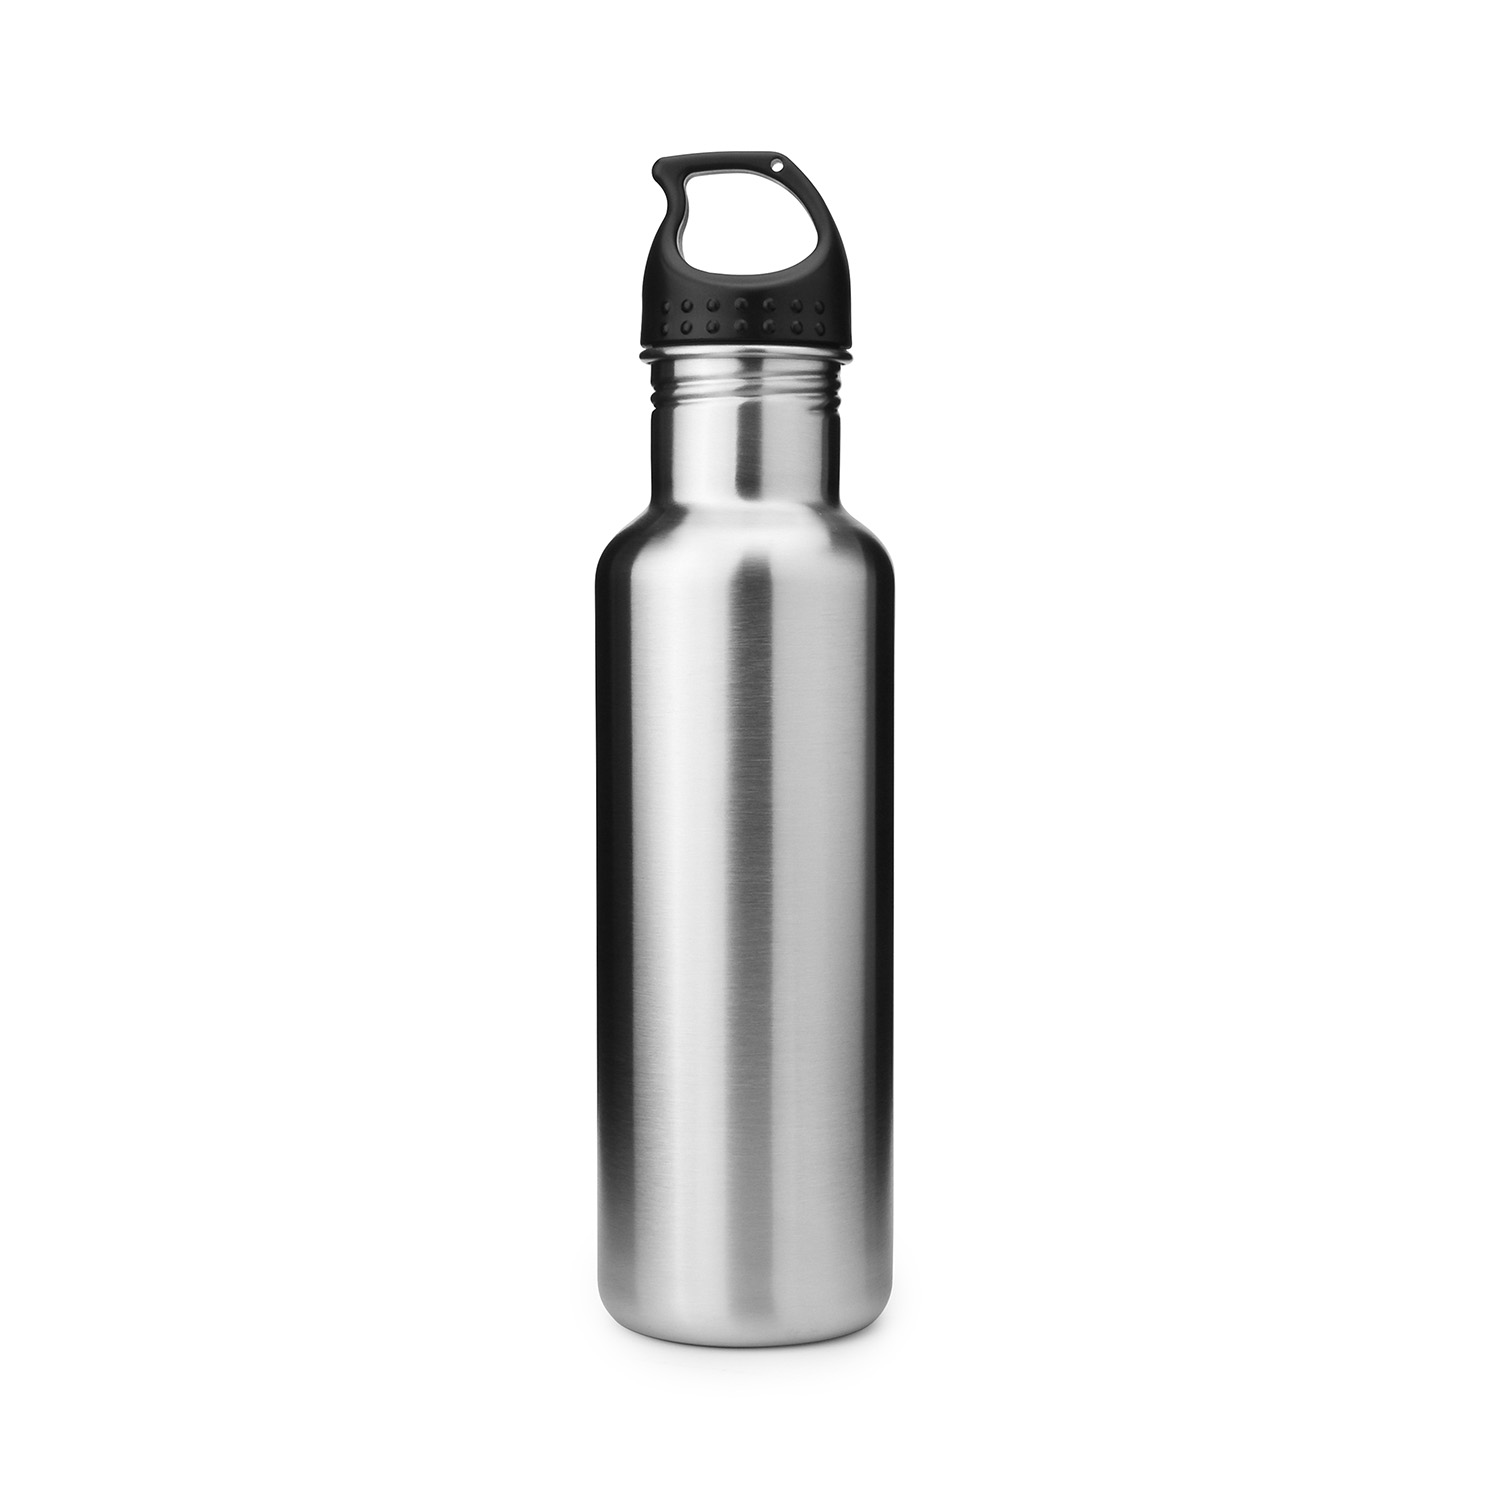 Stainless Steel Sports Water Bottle Reusable Outdoor Camping